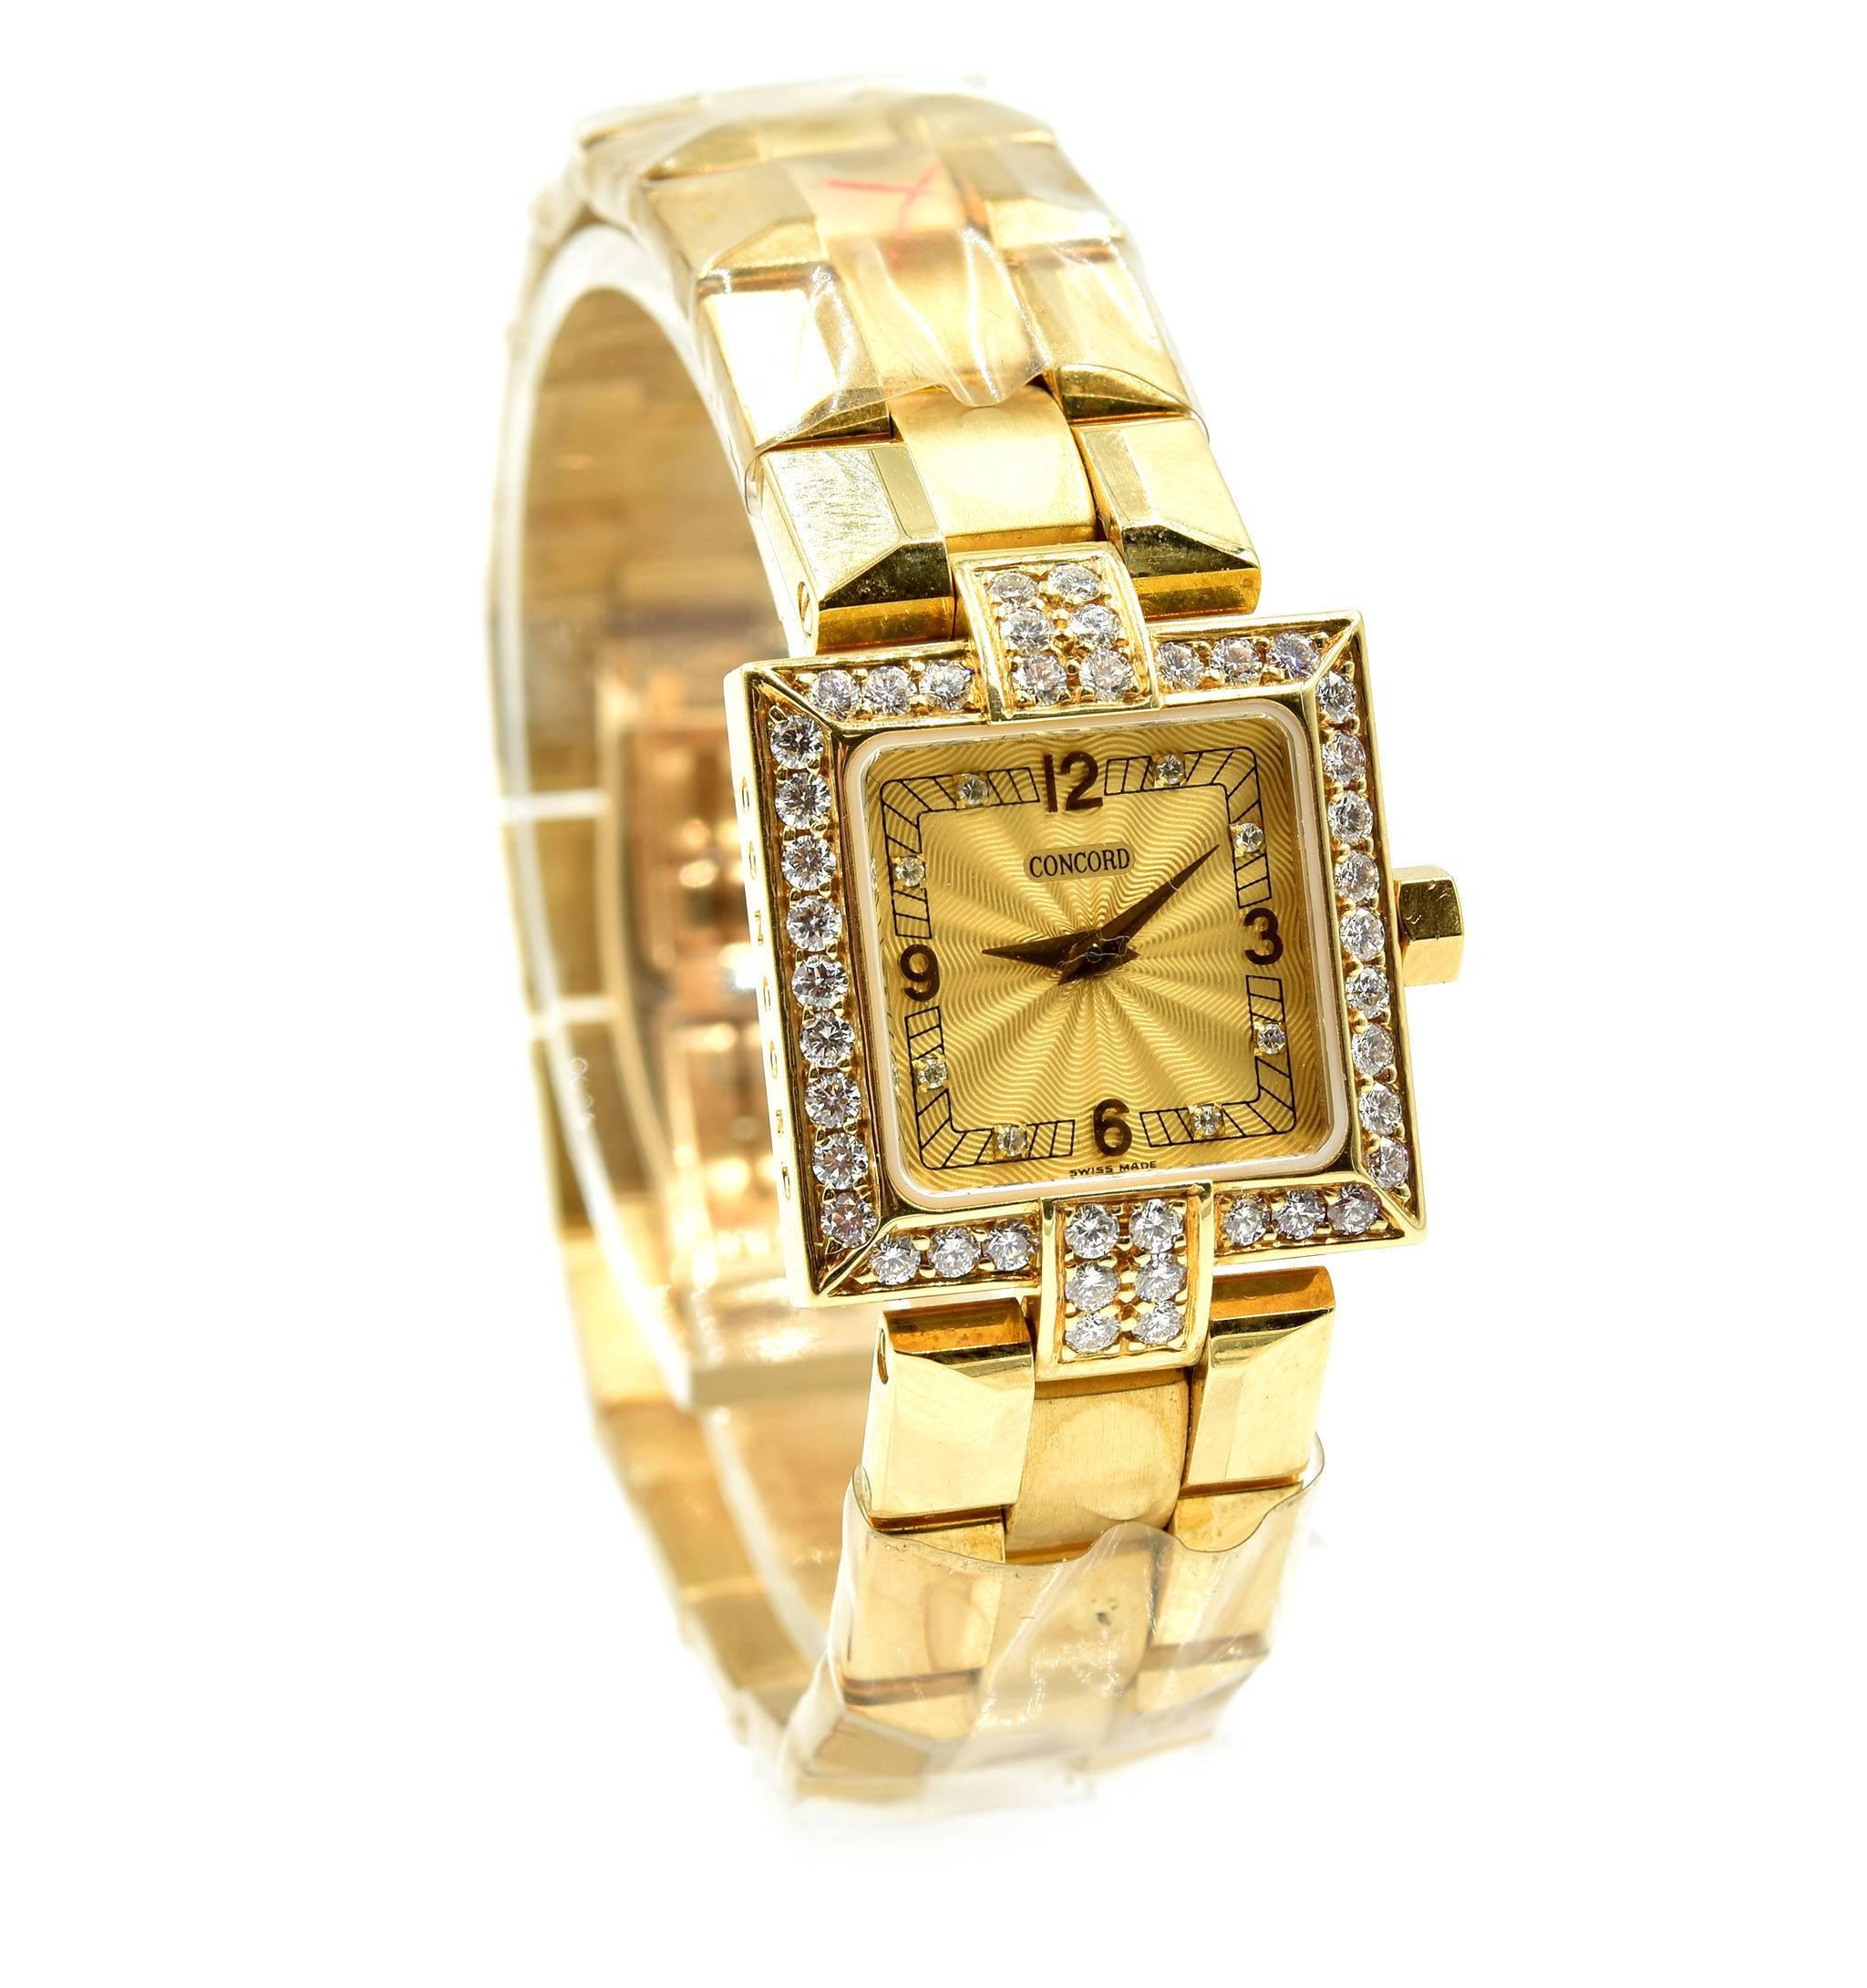 Movement: quartz
Function: hours, minutes
Case: square 20mm x 20mm 18k yellow gold case, diamond case, plastic protective crystal, water resistant to 30 meters
Diamonds: 42 round brilliant cuts = 1.44 carat total weight
Band: 18k yellow gold